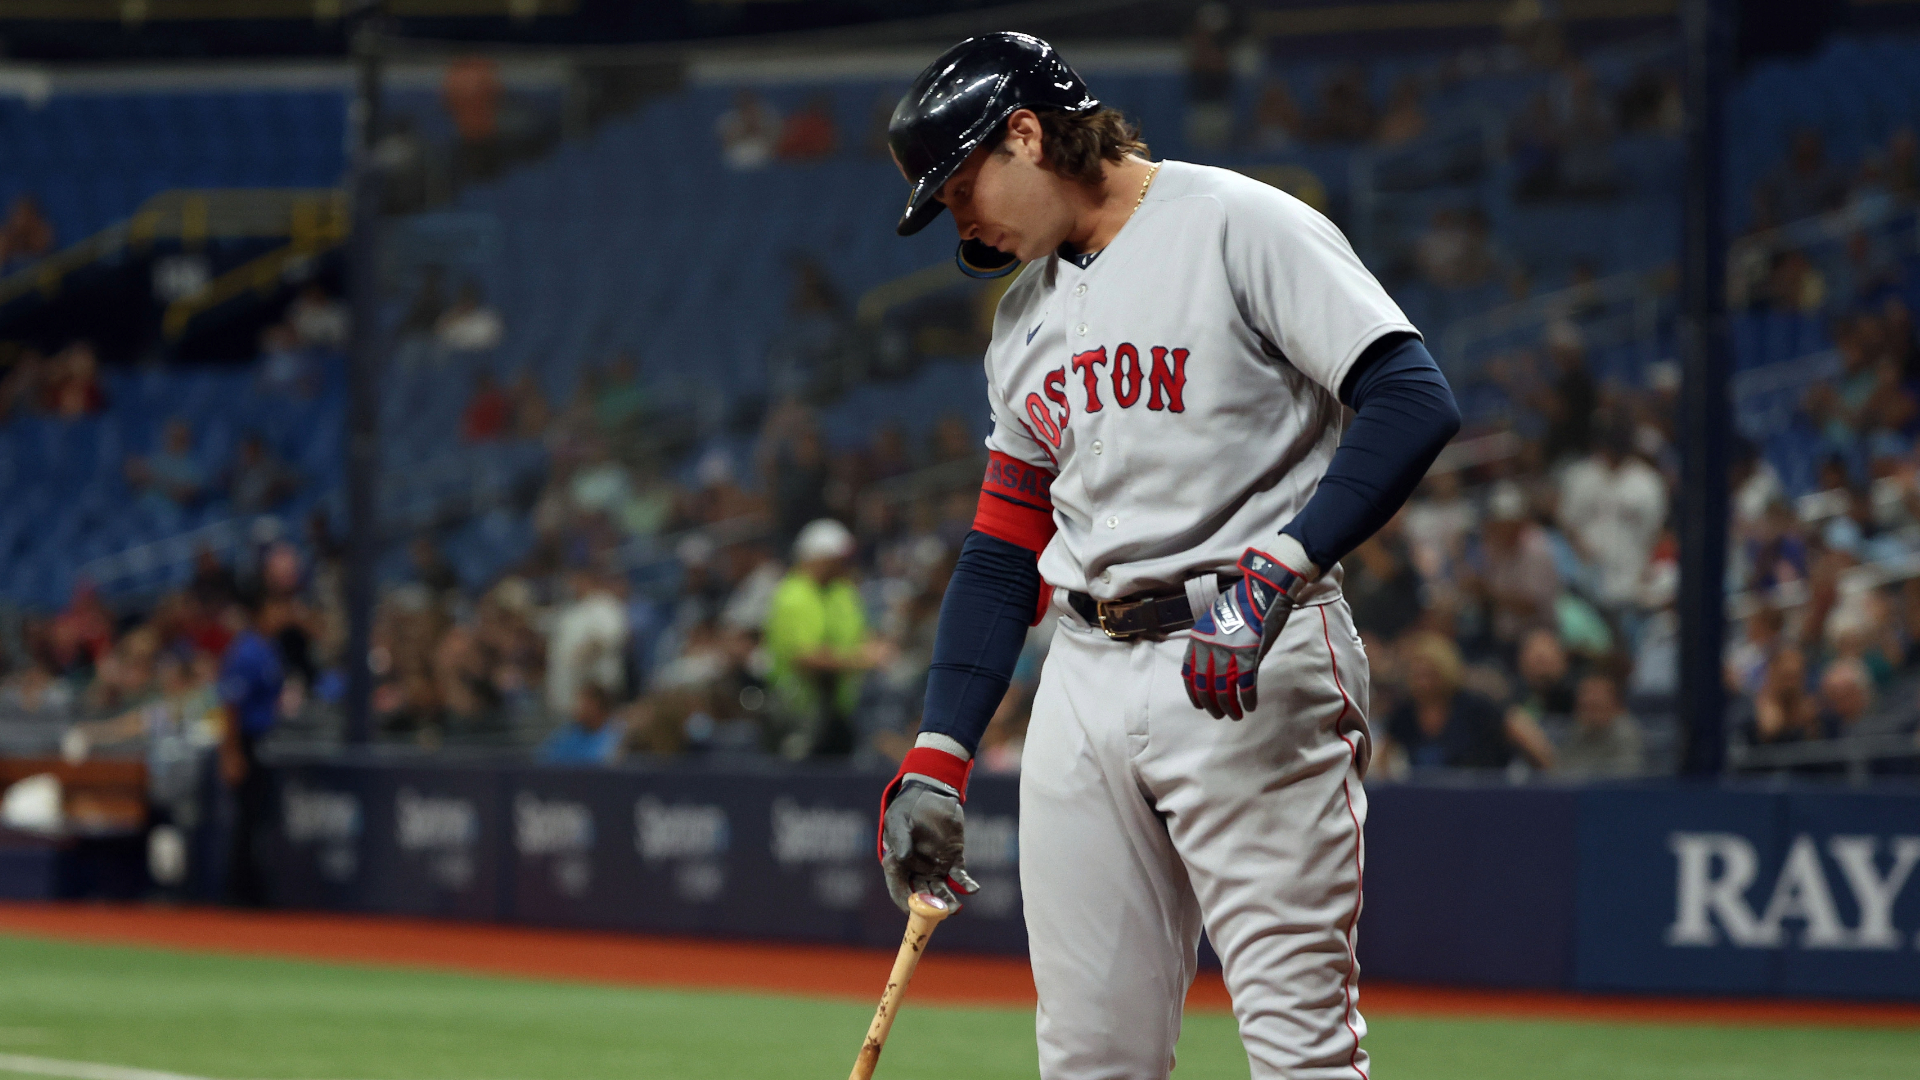 Red Sox Notes: Boston Unable To Combat ‘Buzzsaw’ In Loss Vs. Rays